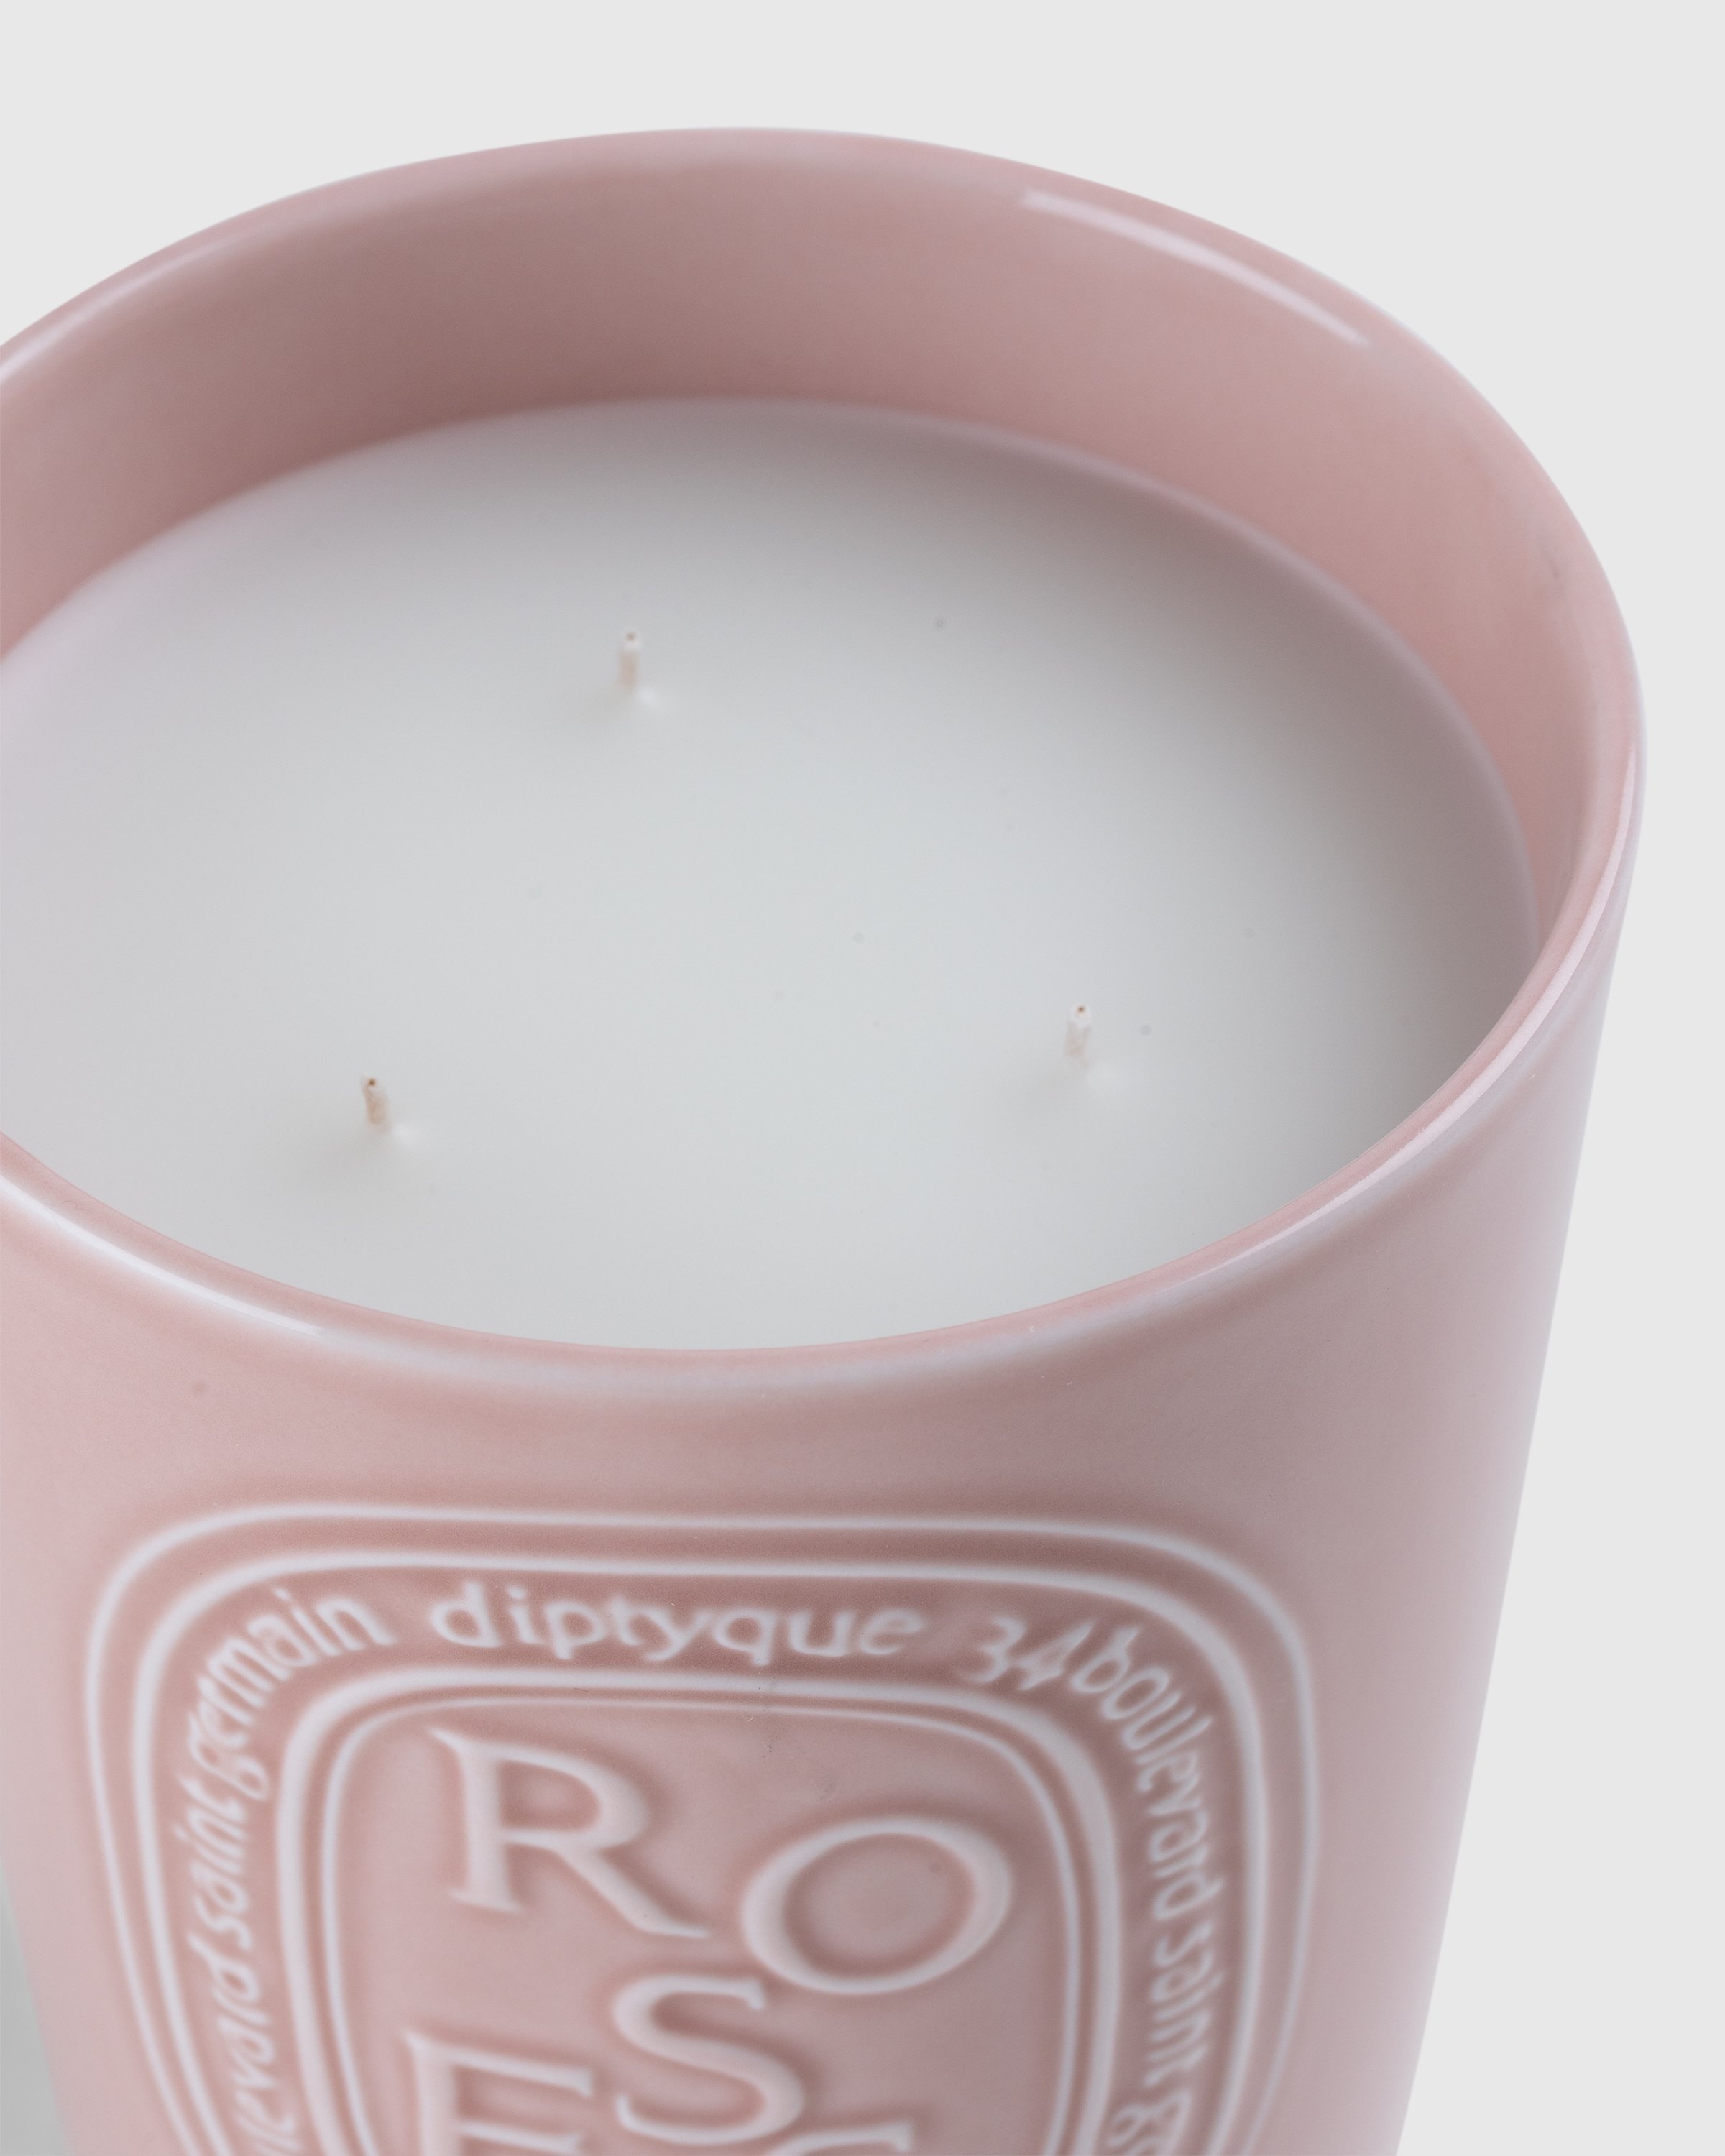 Diptyque – Candle Roses 600g - Candles - Pink - Image 2